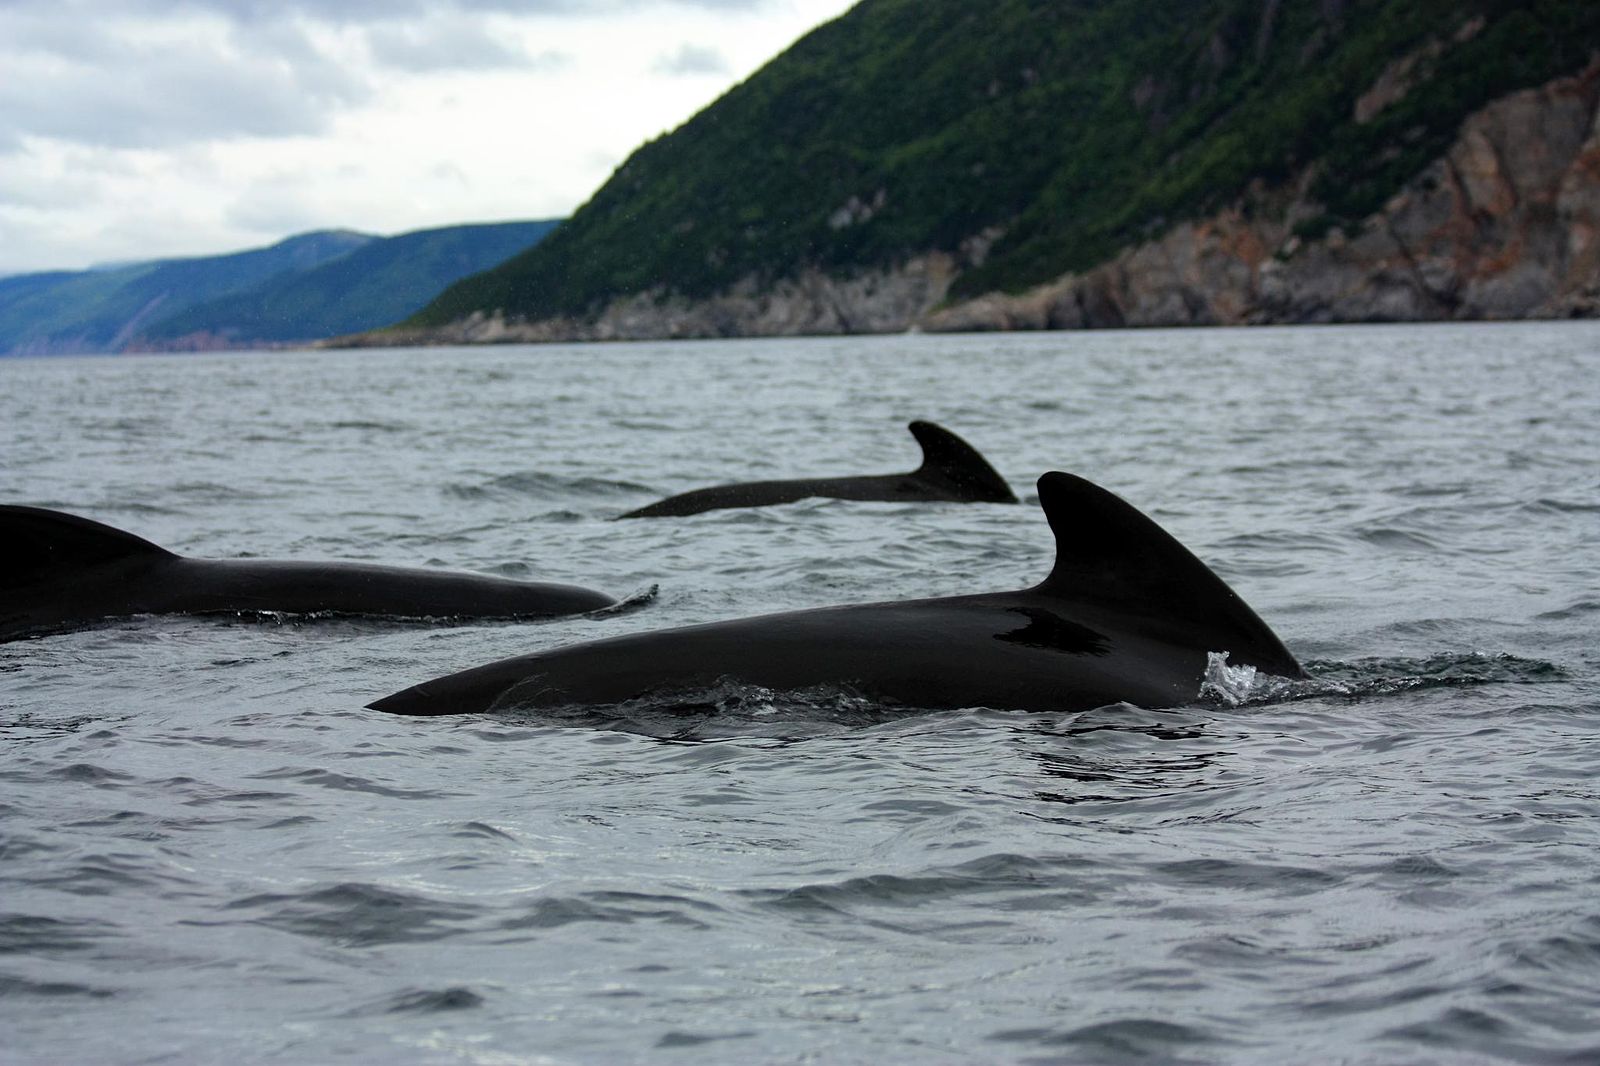 A file photo of pilot whales. Photo: Wikimedia Commons